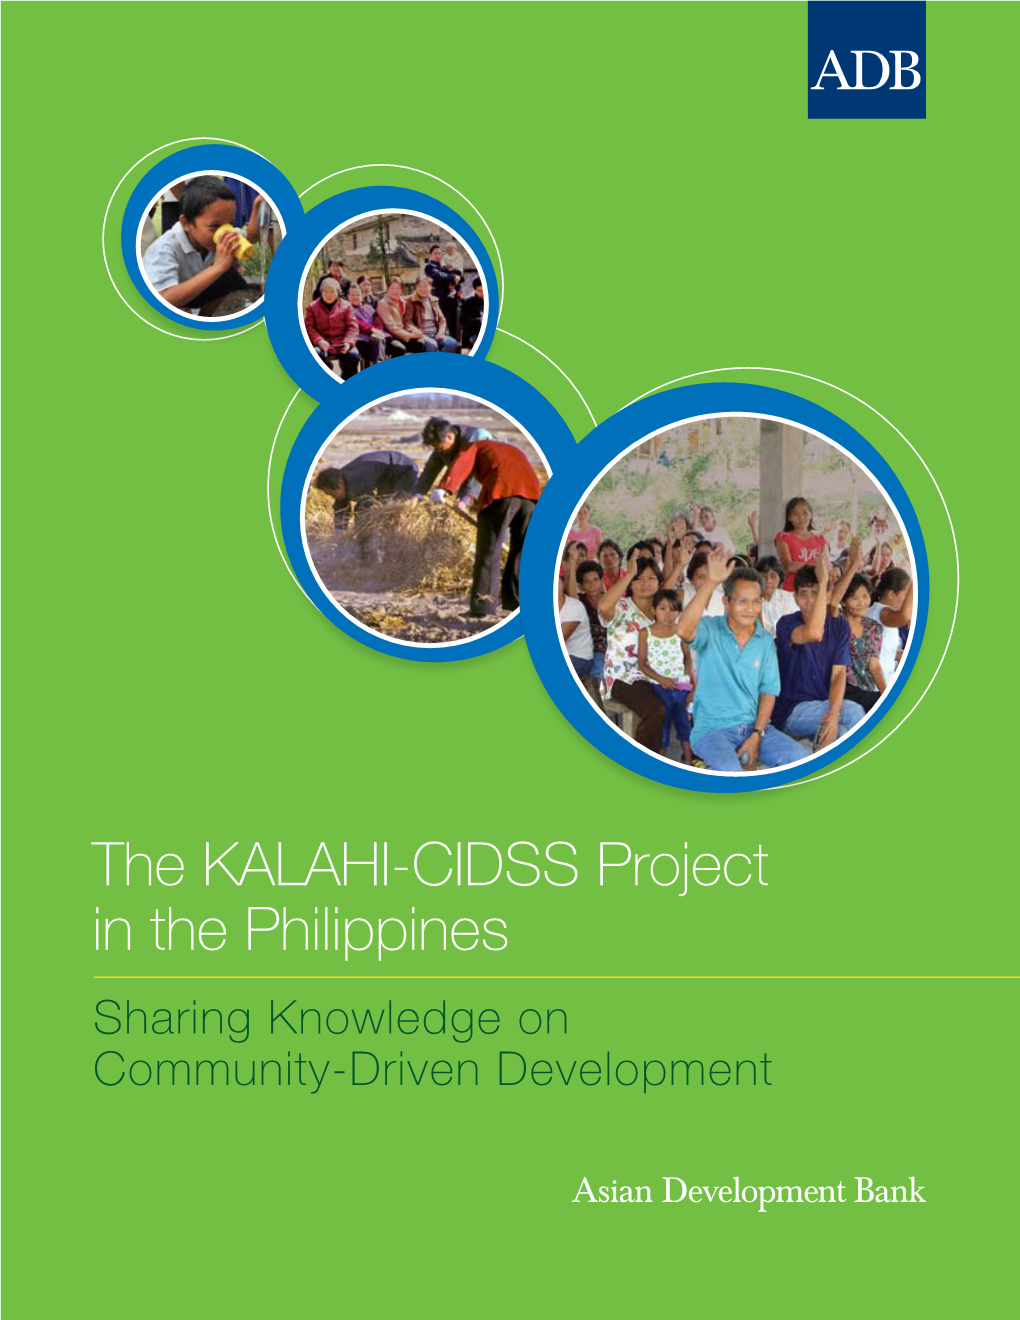 The KALAHI-CIDSS Project in the Philippines